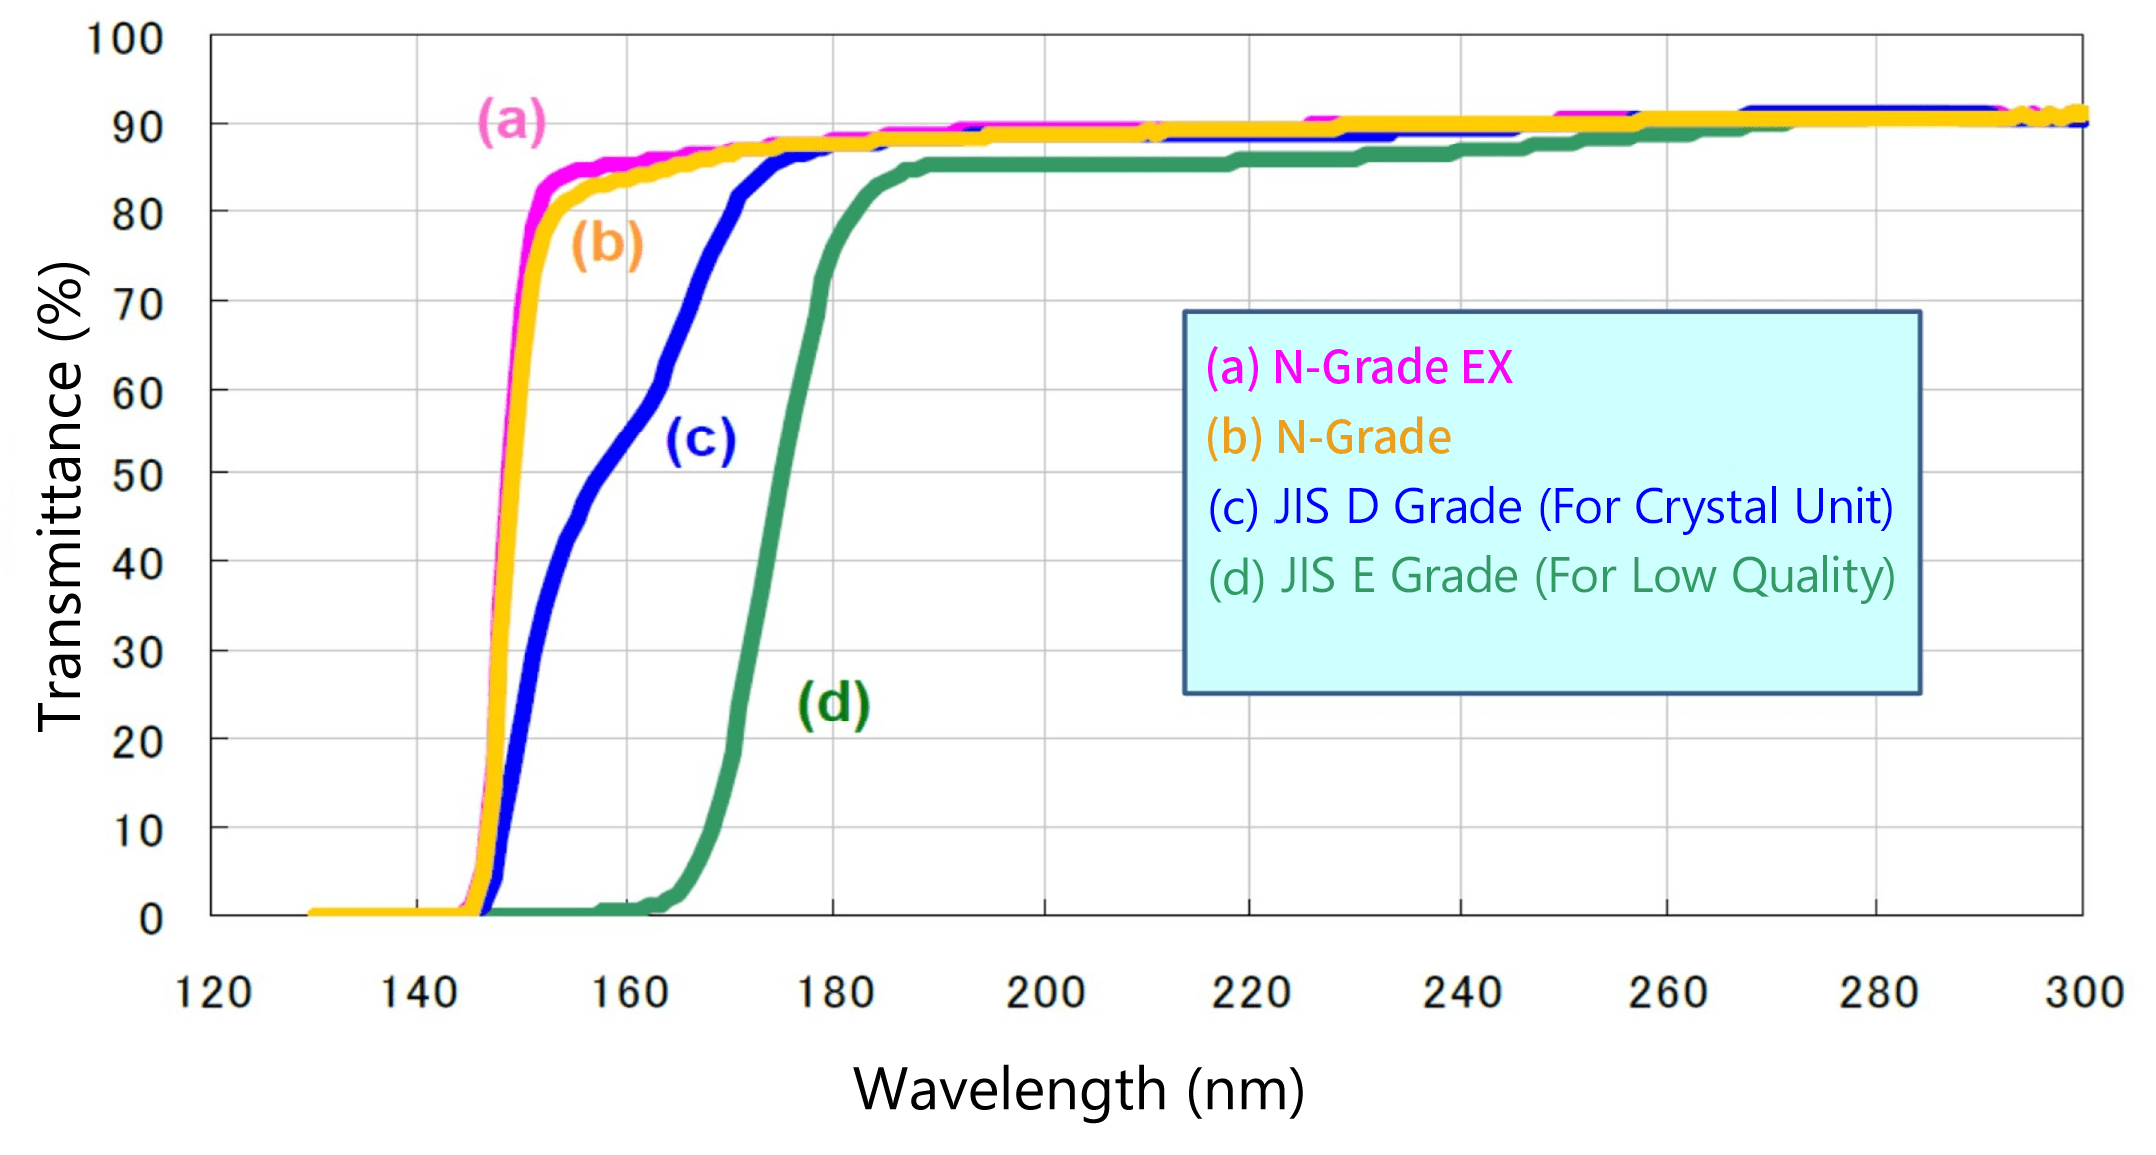 [Figure 3: Transmittance data in vacuum ultraviolet region by quality grade (140-300 nm)]